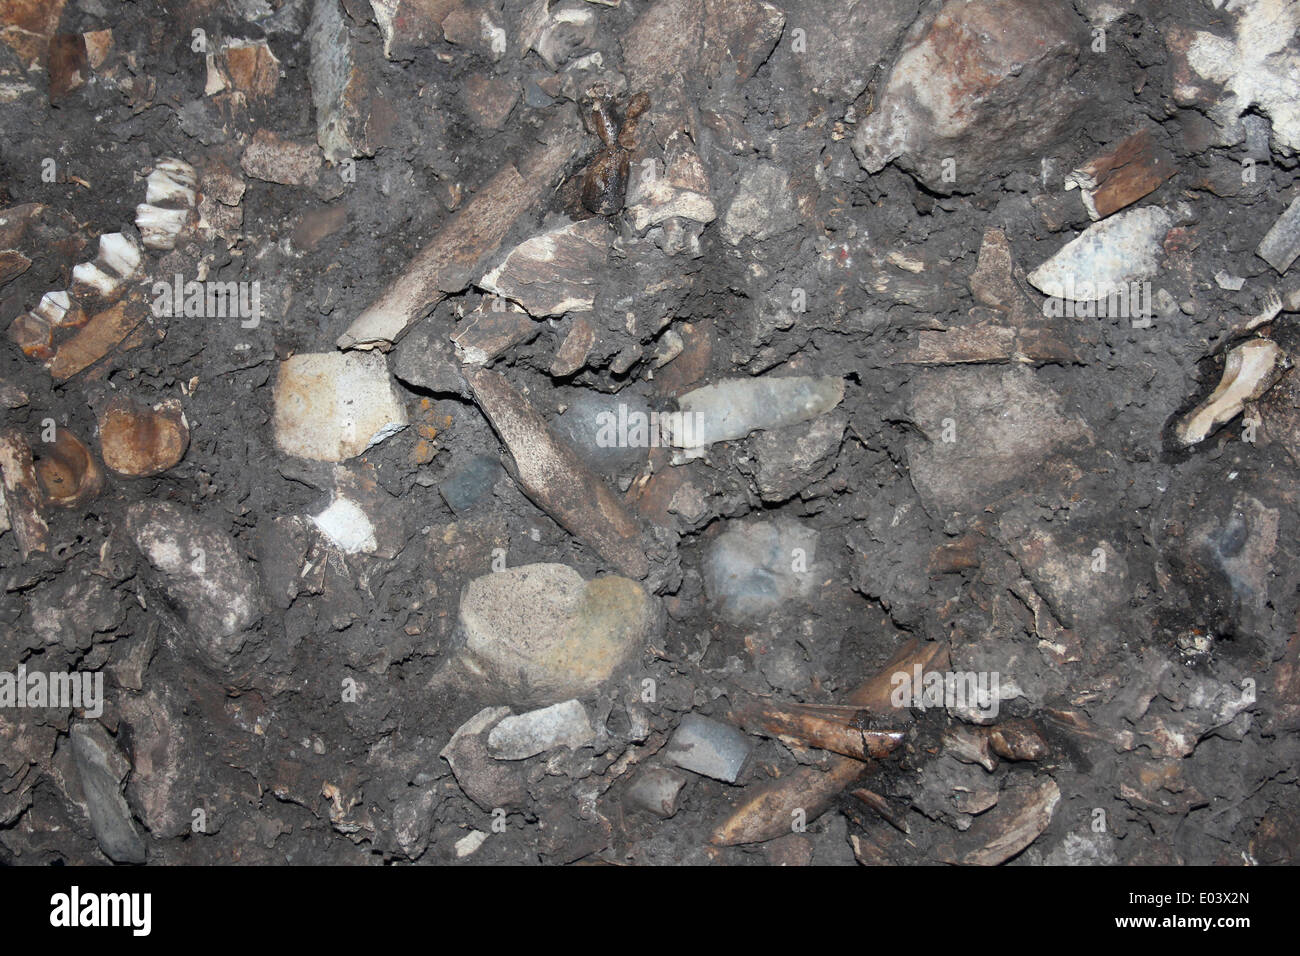 Cave Floor With Fossils, France Stock Photo